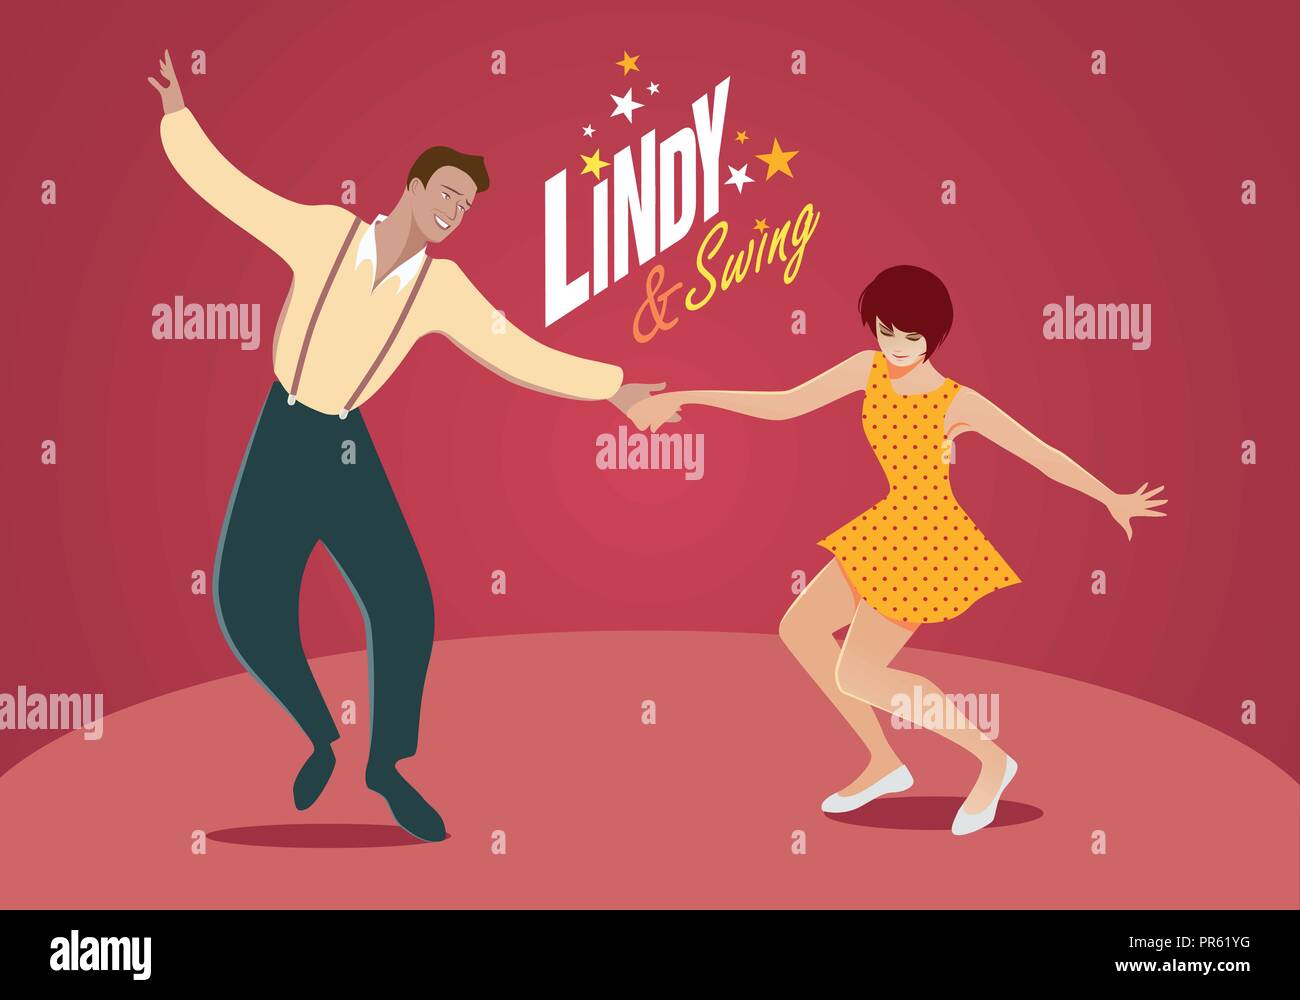 Young couple dancing swing or lindy hop Stock Vector